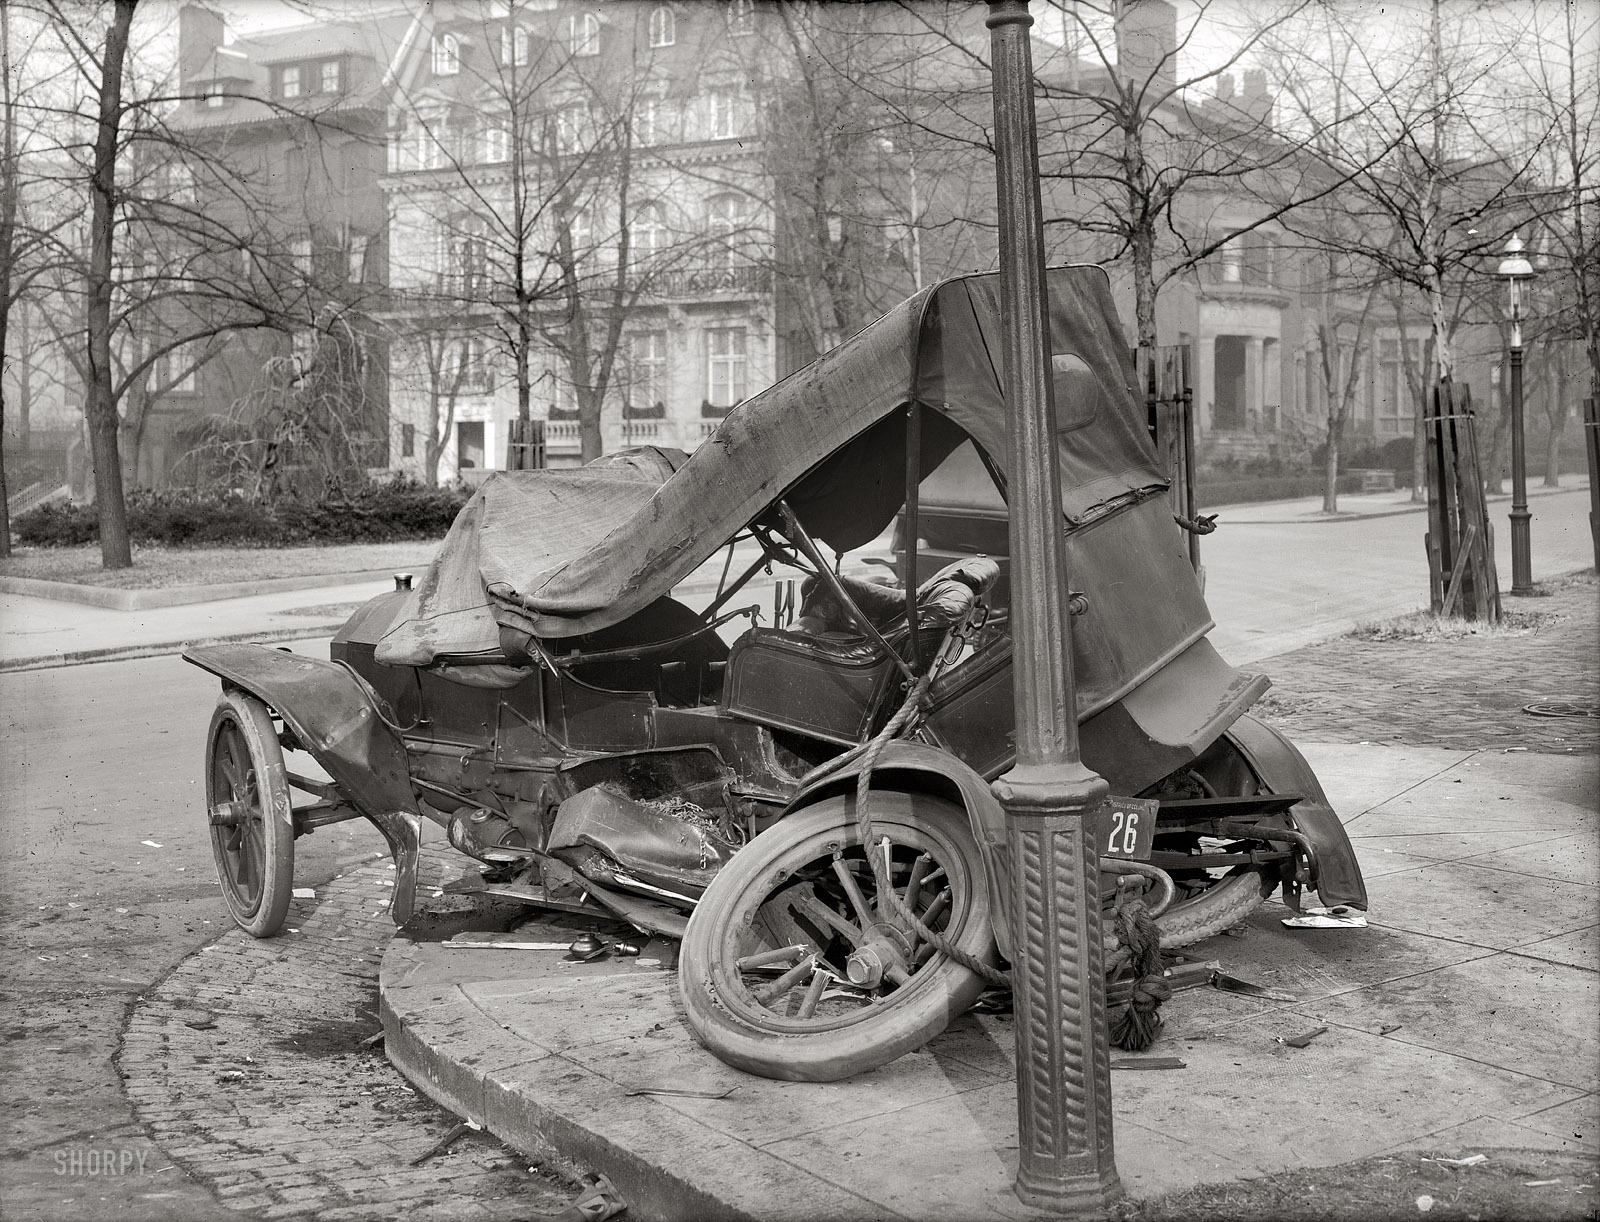 "Auto wreck, Washington, circa 1917." D.C. license plate number for this car: 26. National Photo Company Collection glass negative. View full size.